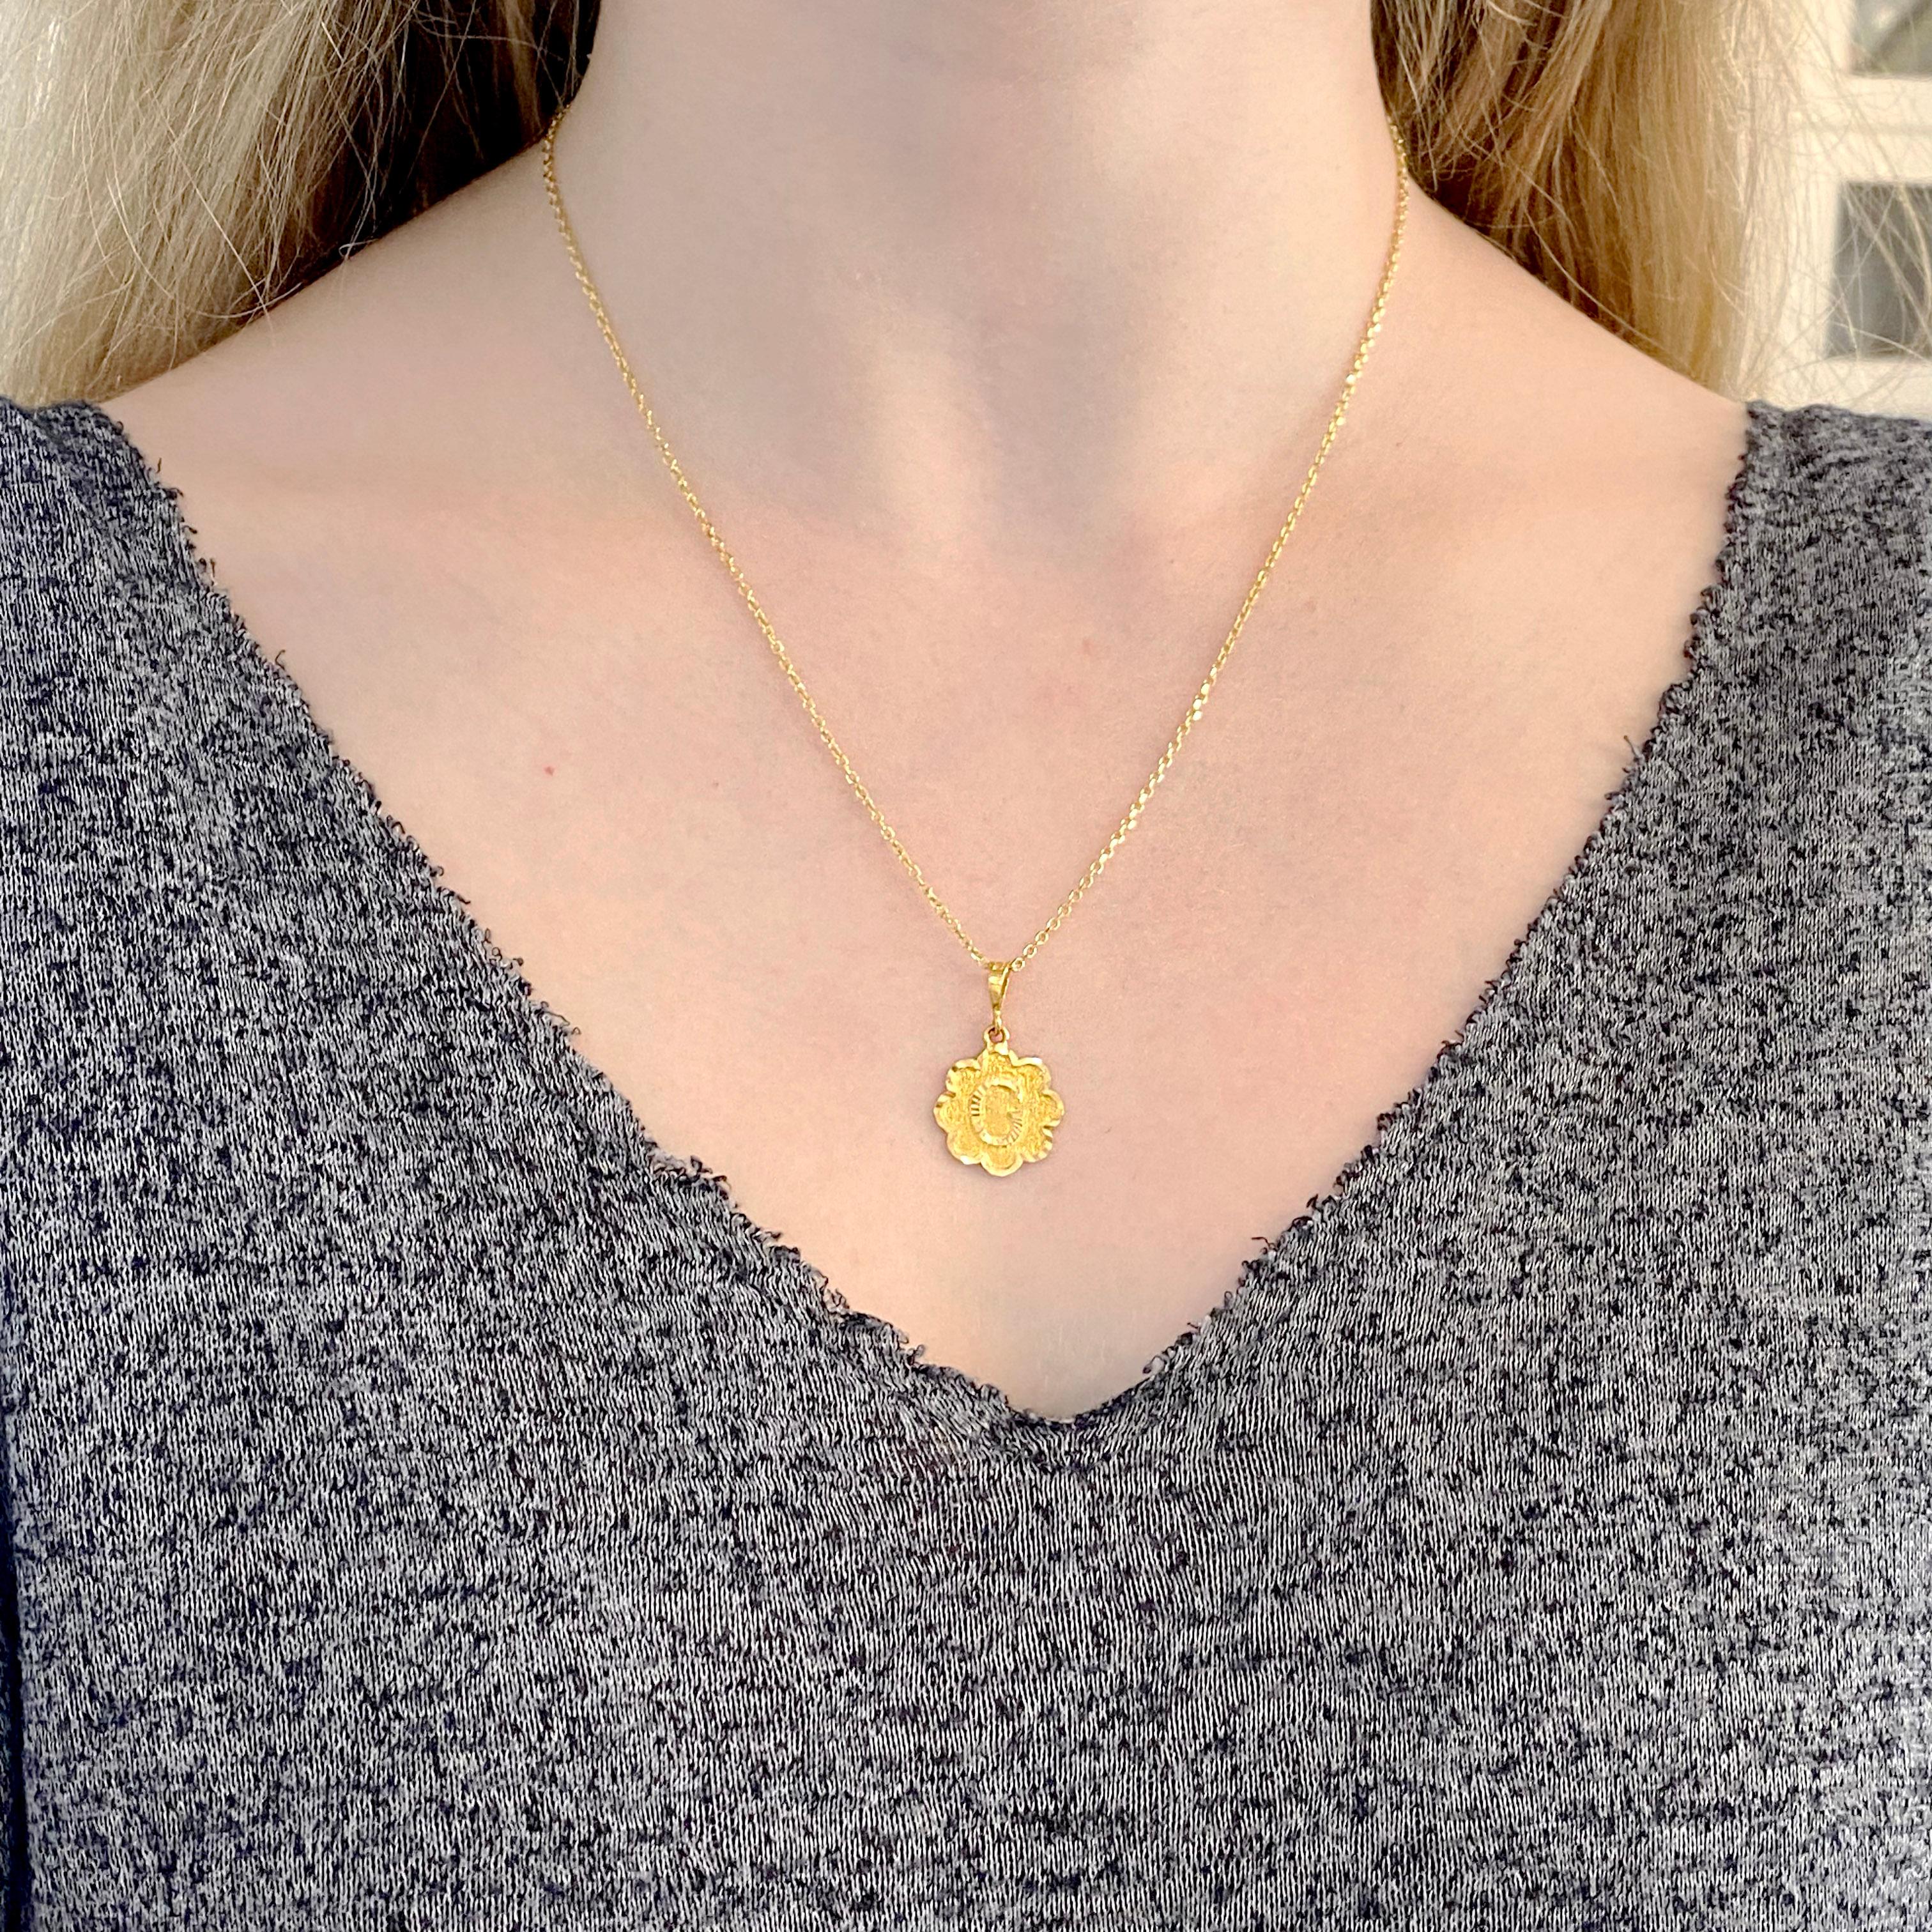 22K Yellow Gold Pendant “G” Initial and 14k Yellow Gold Chain. The G initial was diamond cut and the “G” is raised!
Chain Length: 18in (Adjustable to 16